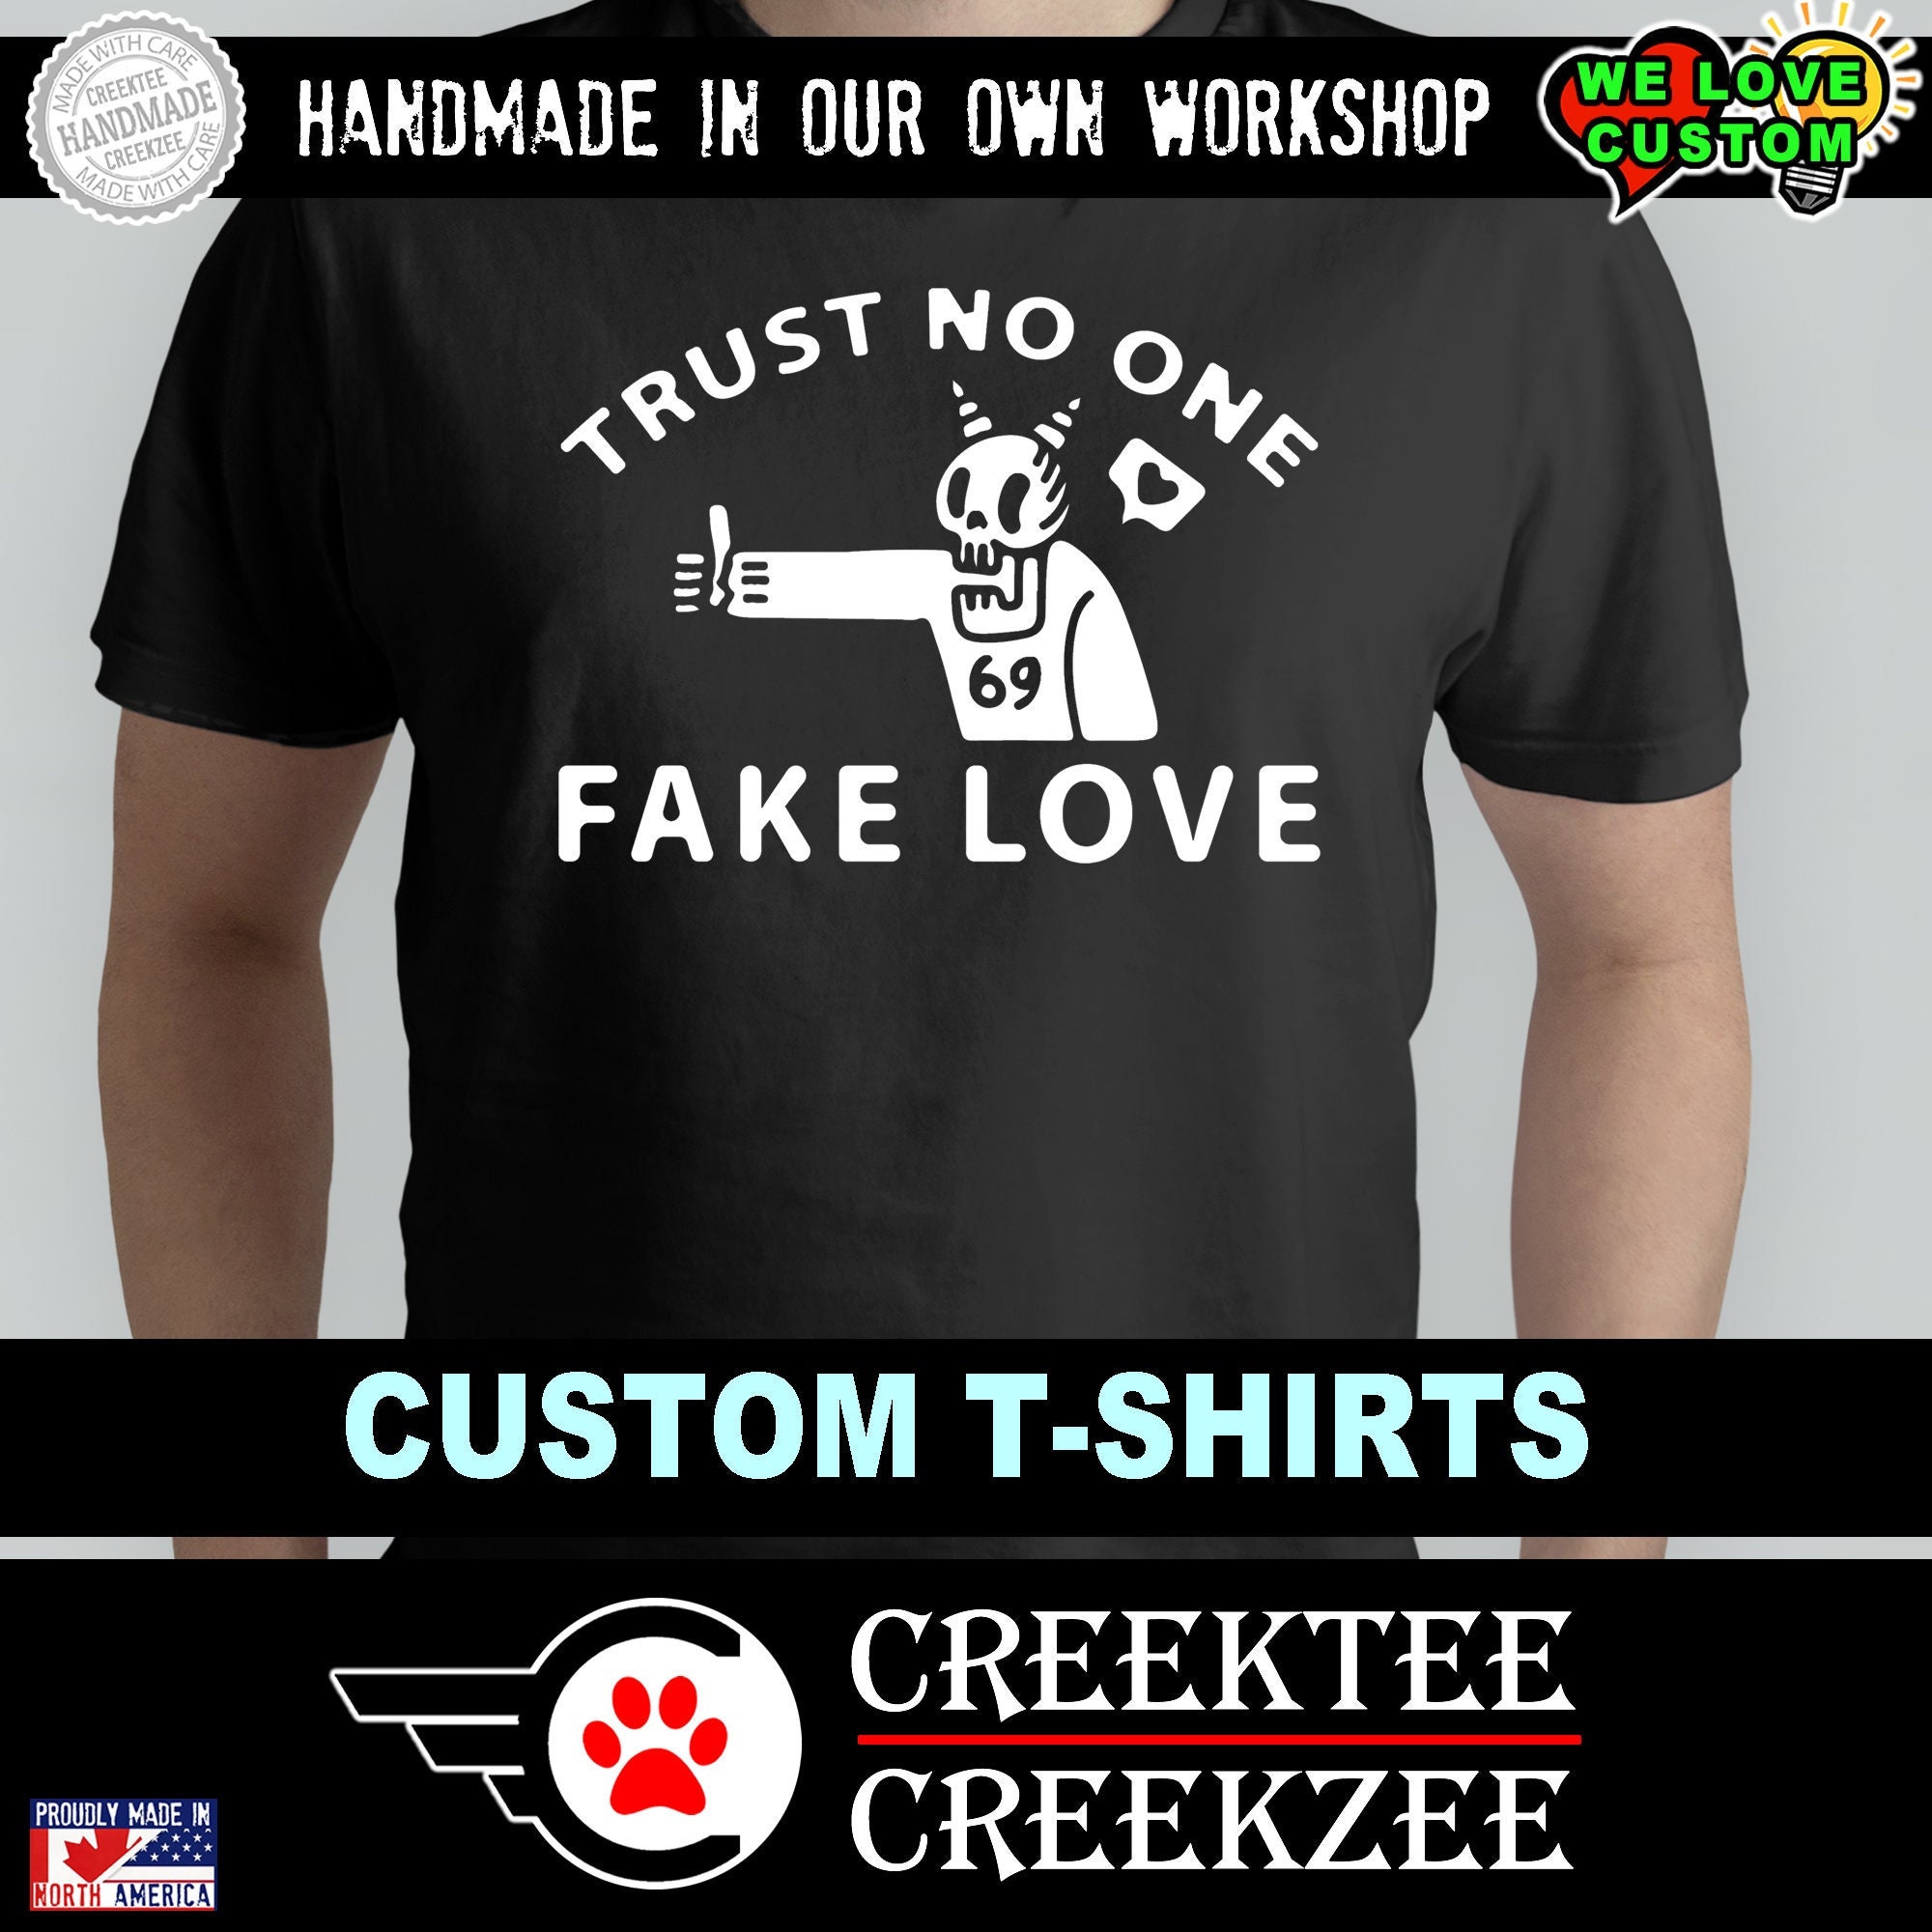 T-Shirt Trust No One Fake Love Quality T-Shirt. Vinyl Print Full Color, Uniquely Designed To Stand Out